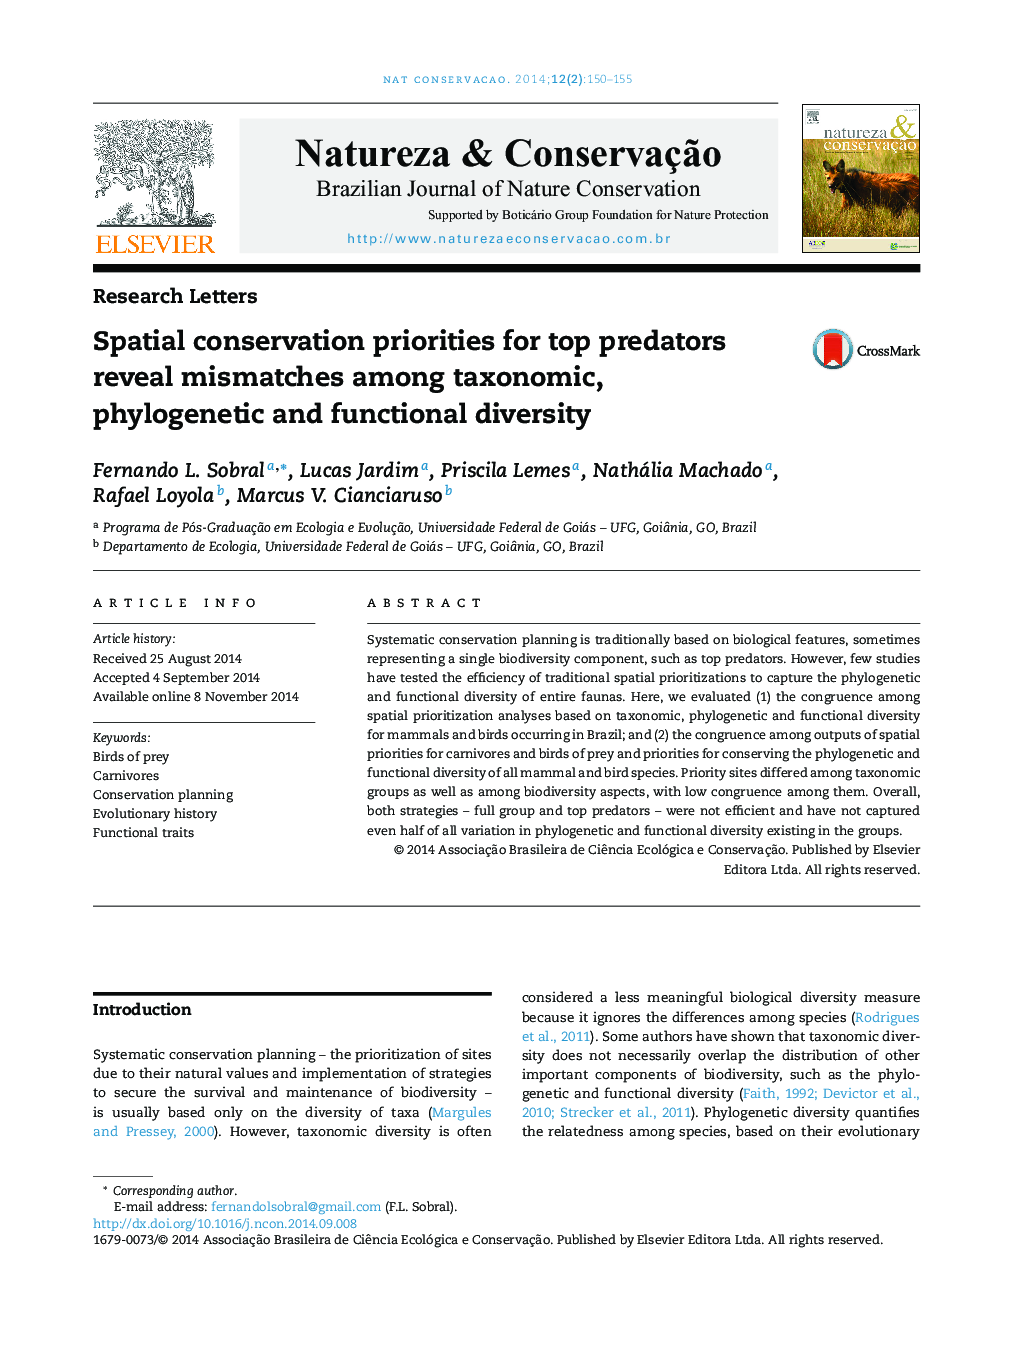 Spatial conservation priorities for top predators reveal mismatches among taxonomic, phylogenetic and functional diversity